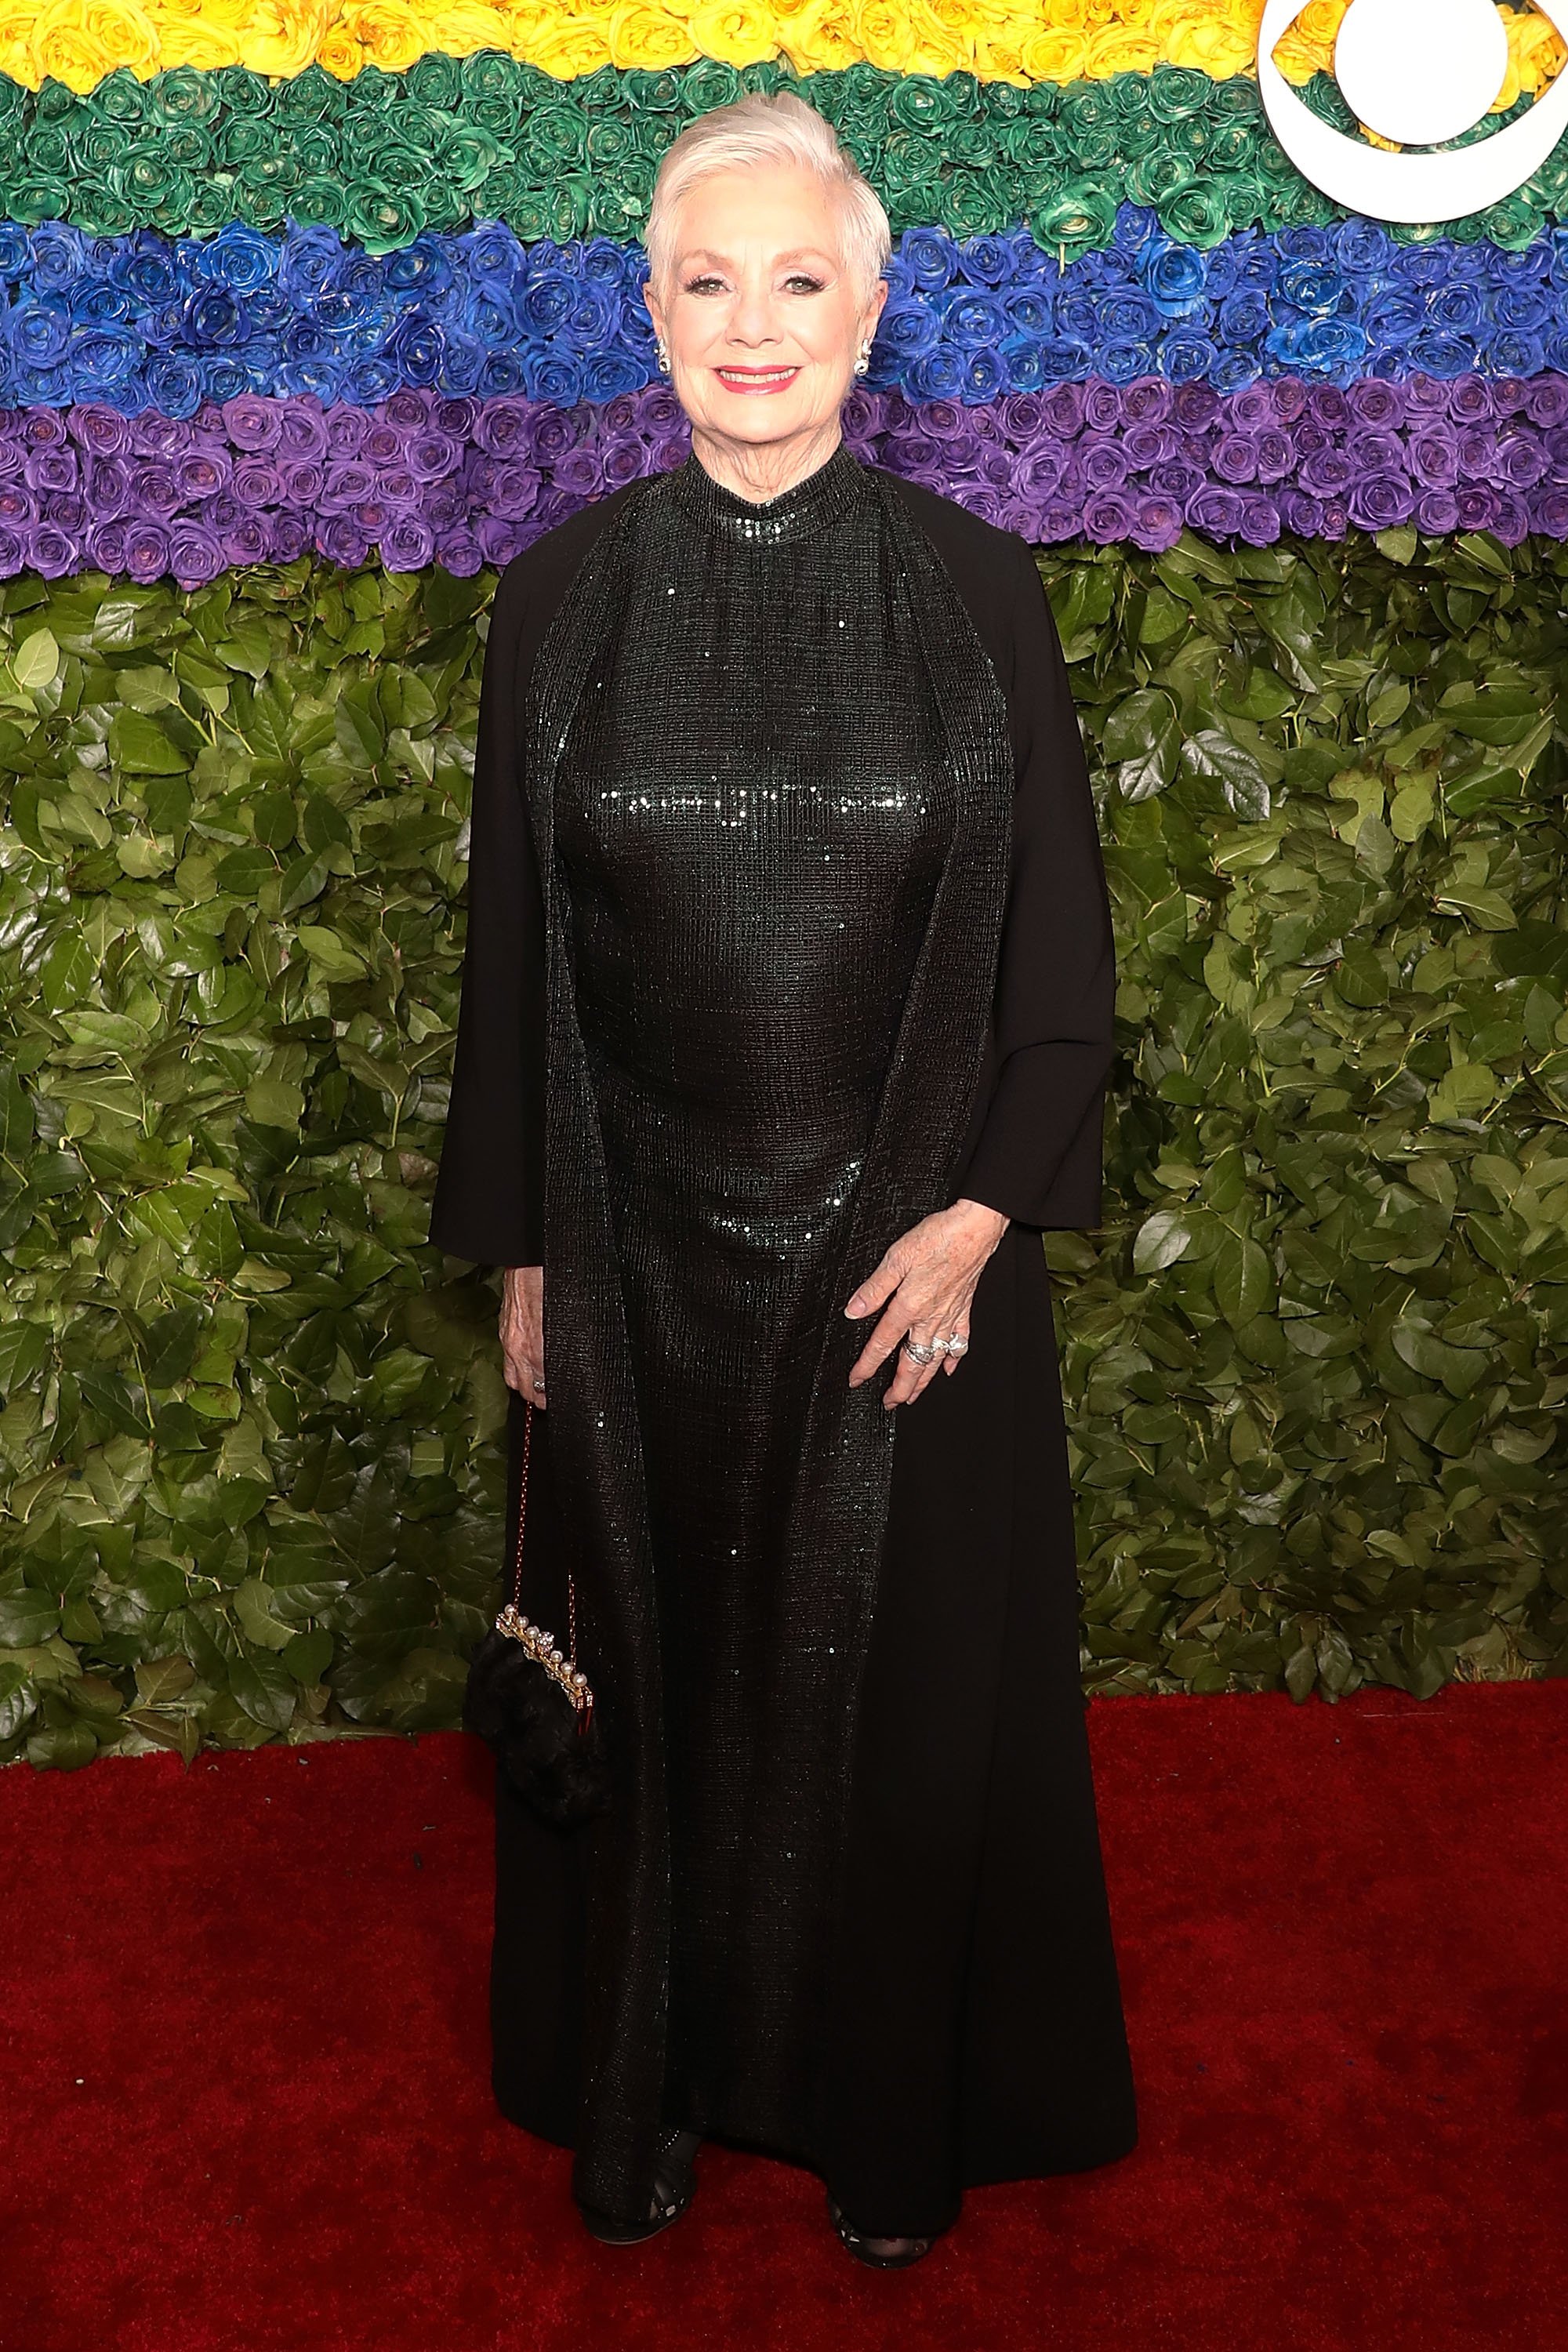 Actress Shirley Jones attends the 2019 Tony Awards at Radio City Music Hall on June 9, 2019 in New York City.┃Source: Getty Images